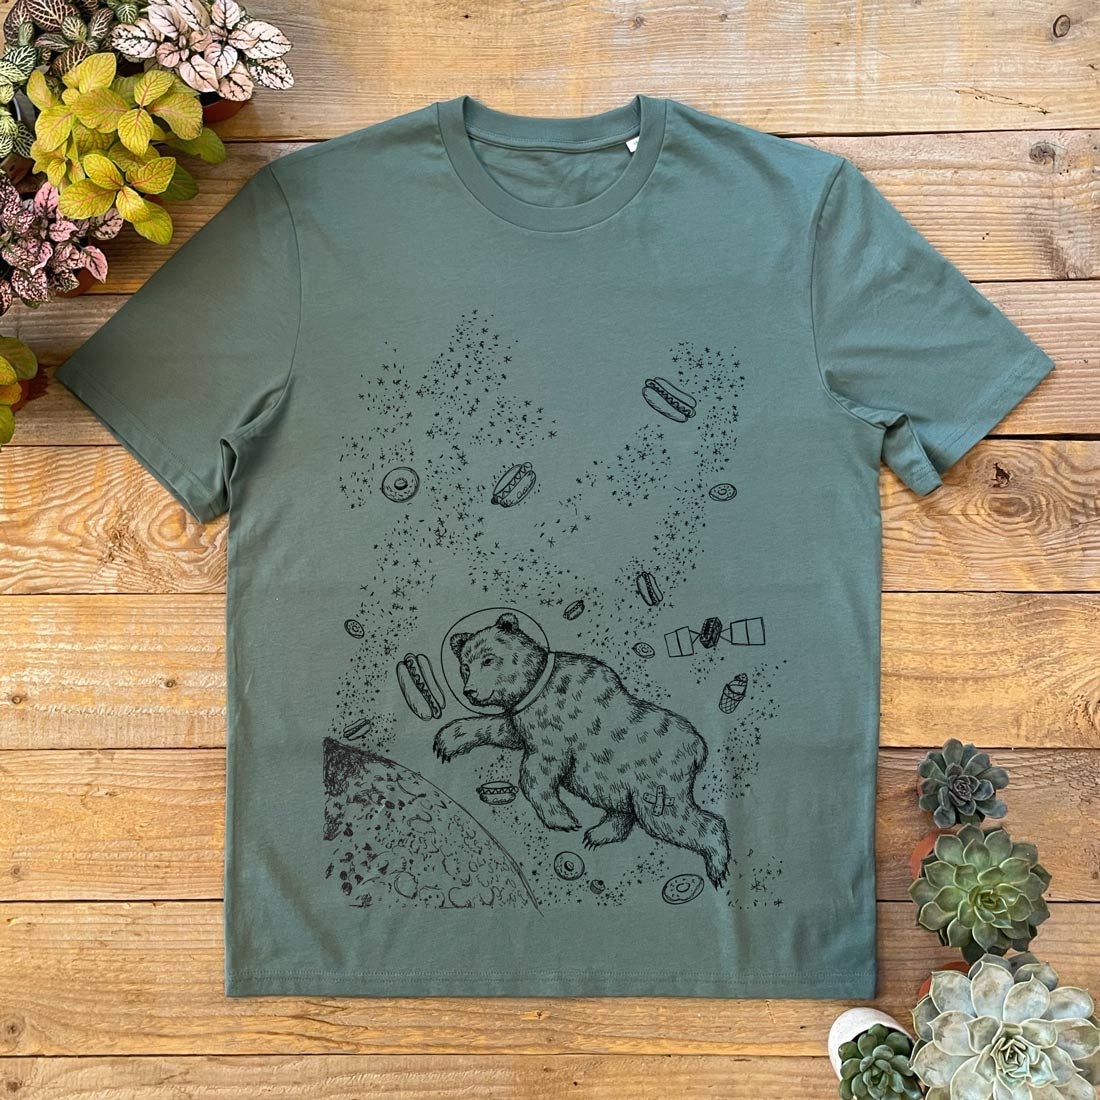 khaki tee with bear chasing hot dogs in space